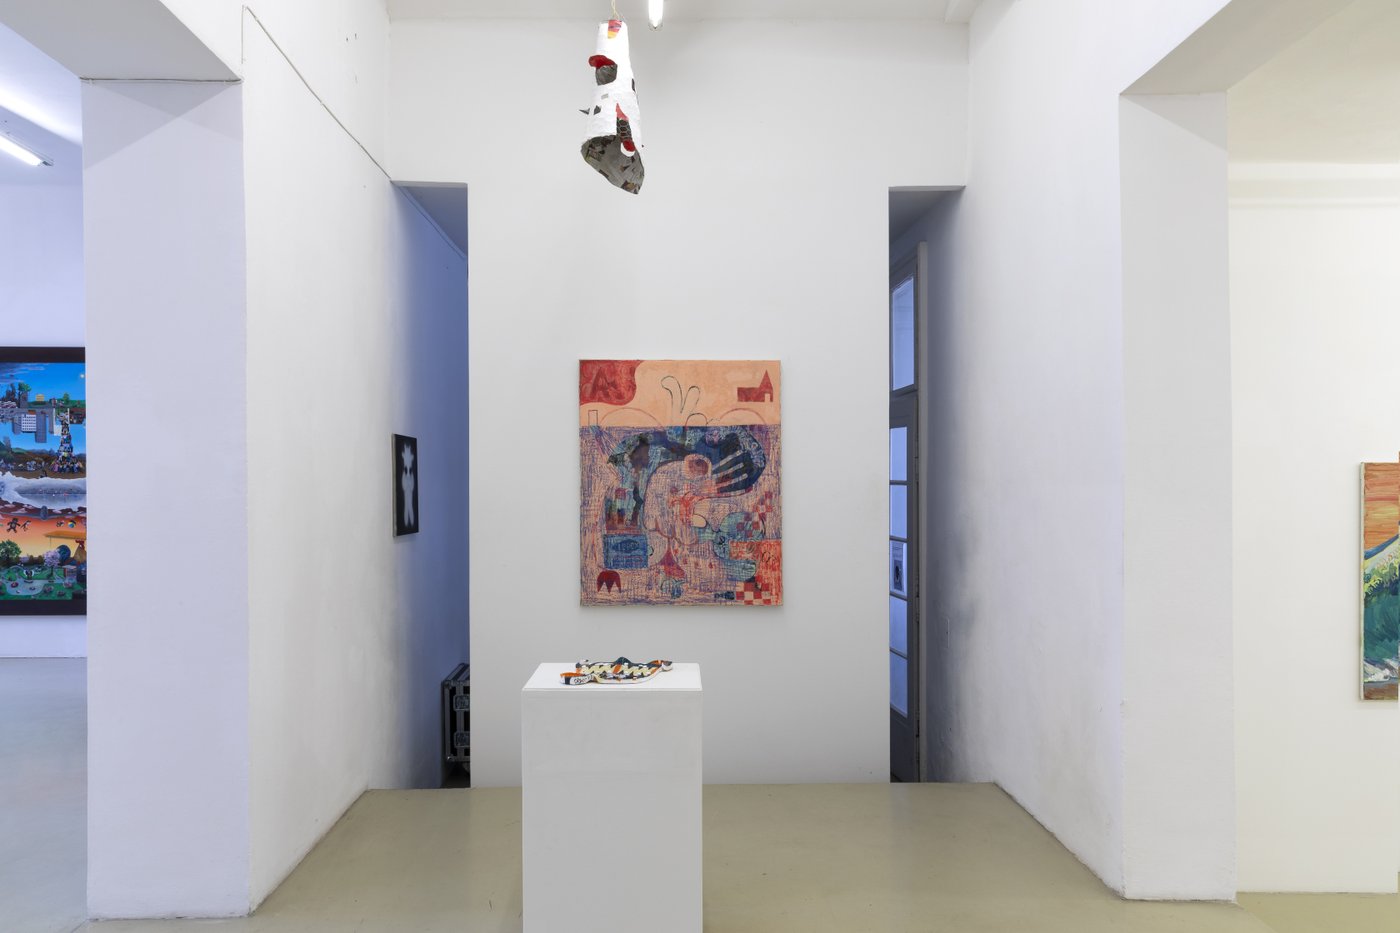 exhibition view with paintings and an installation